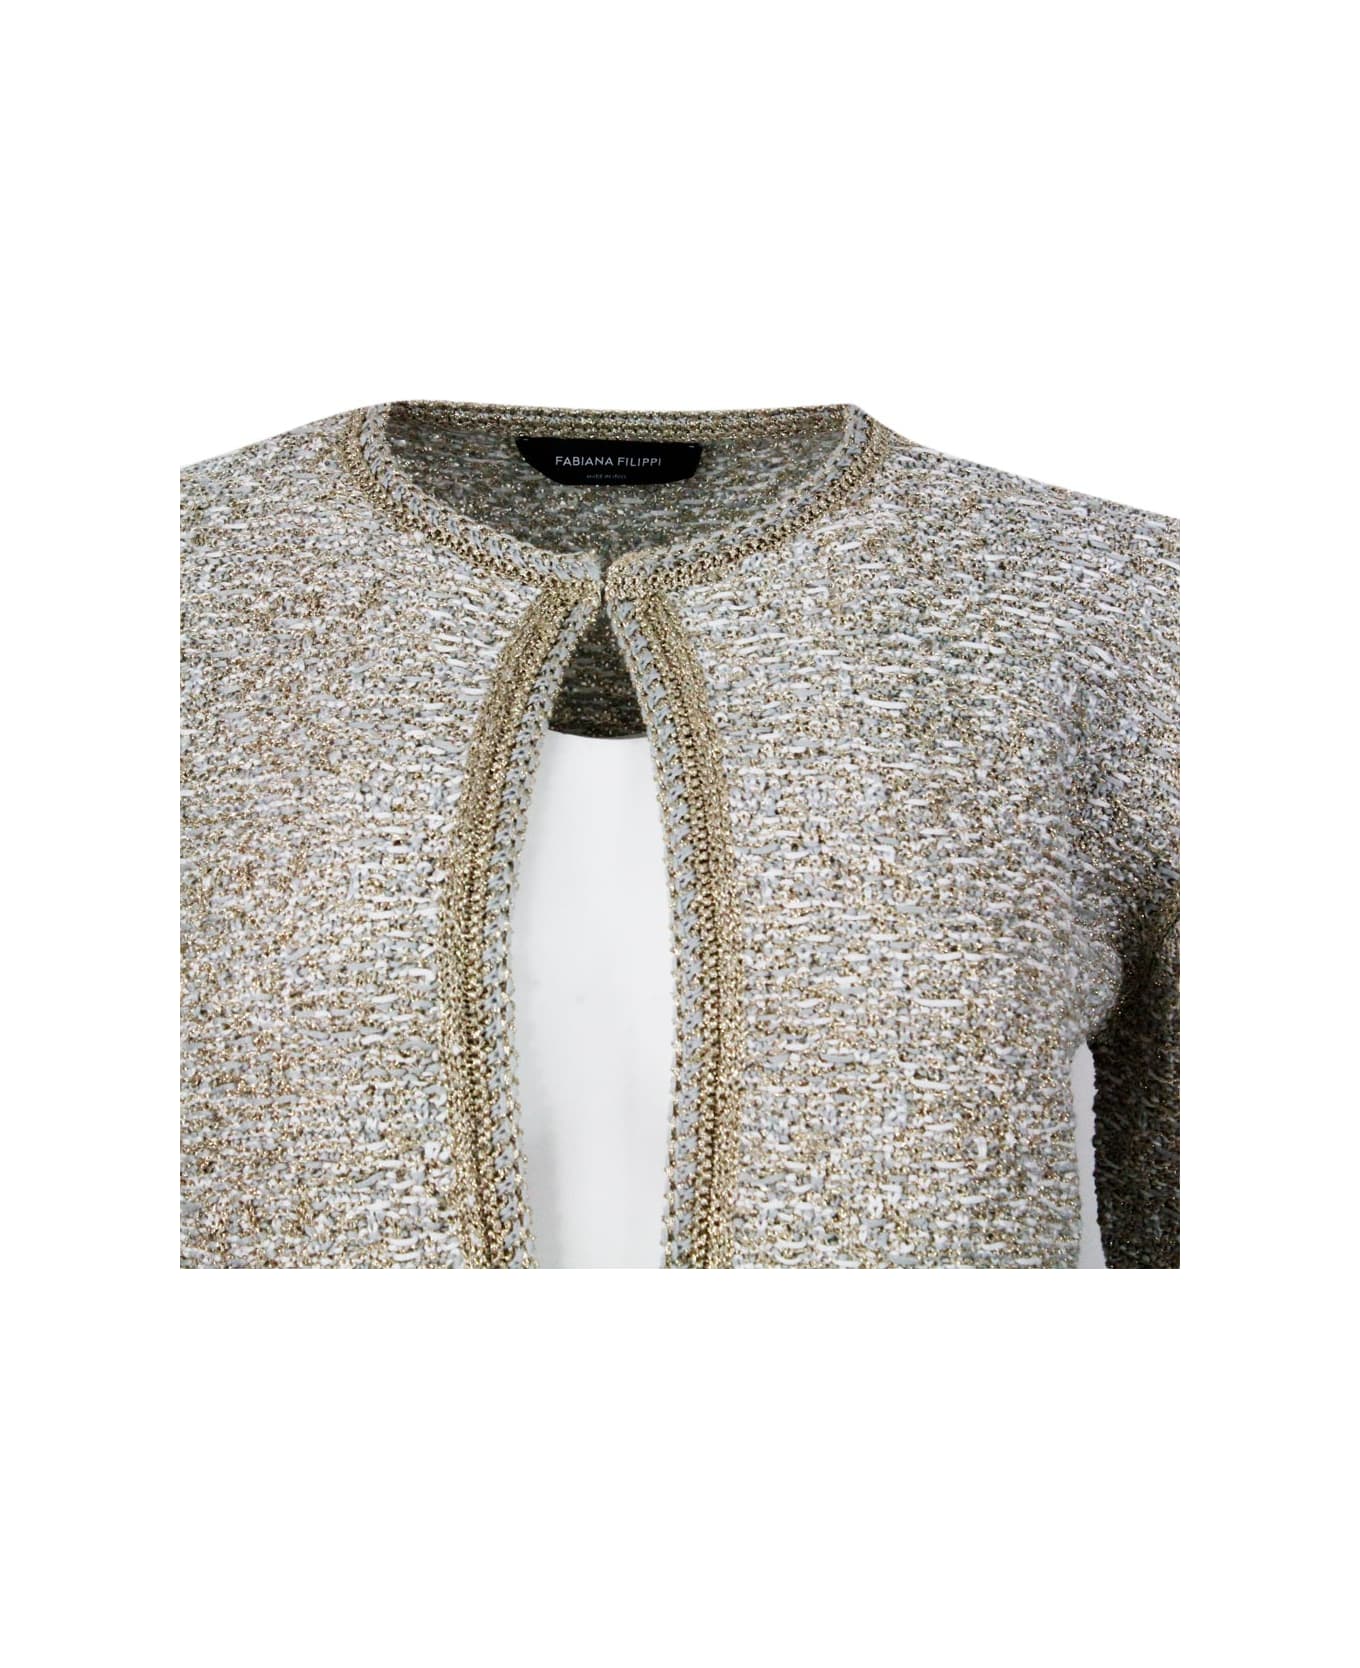 Fabiana Filippi Chanel-style Jacket Sweater Open On The Front And With Hook Closure Embellished With Bright Lurex Threads - Gold カーディガン